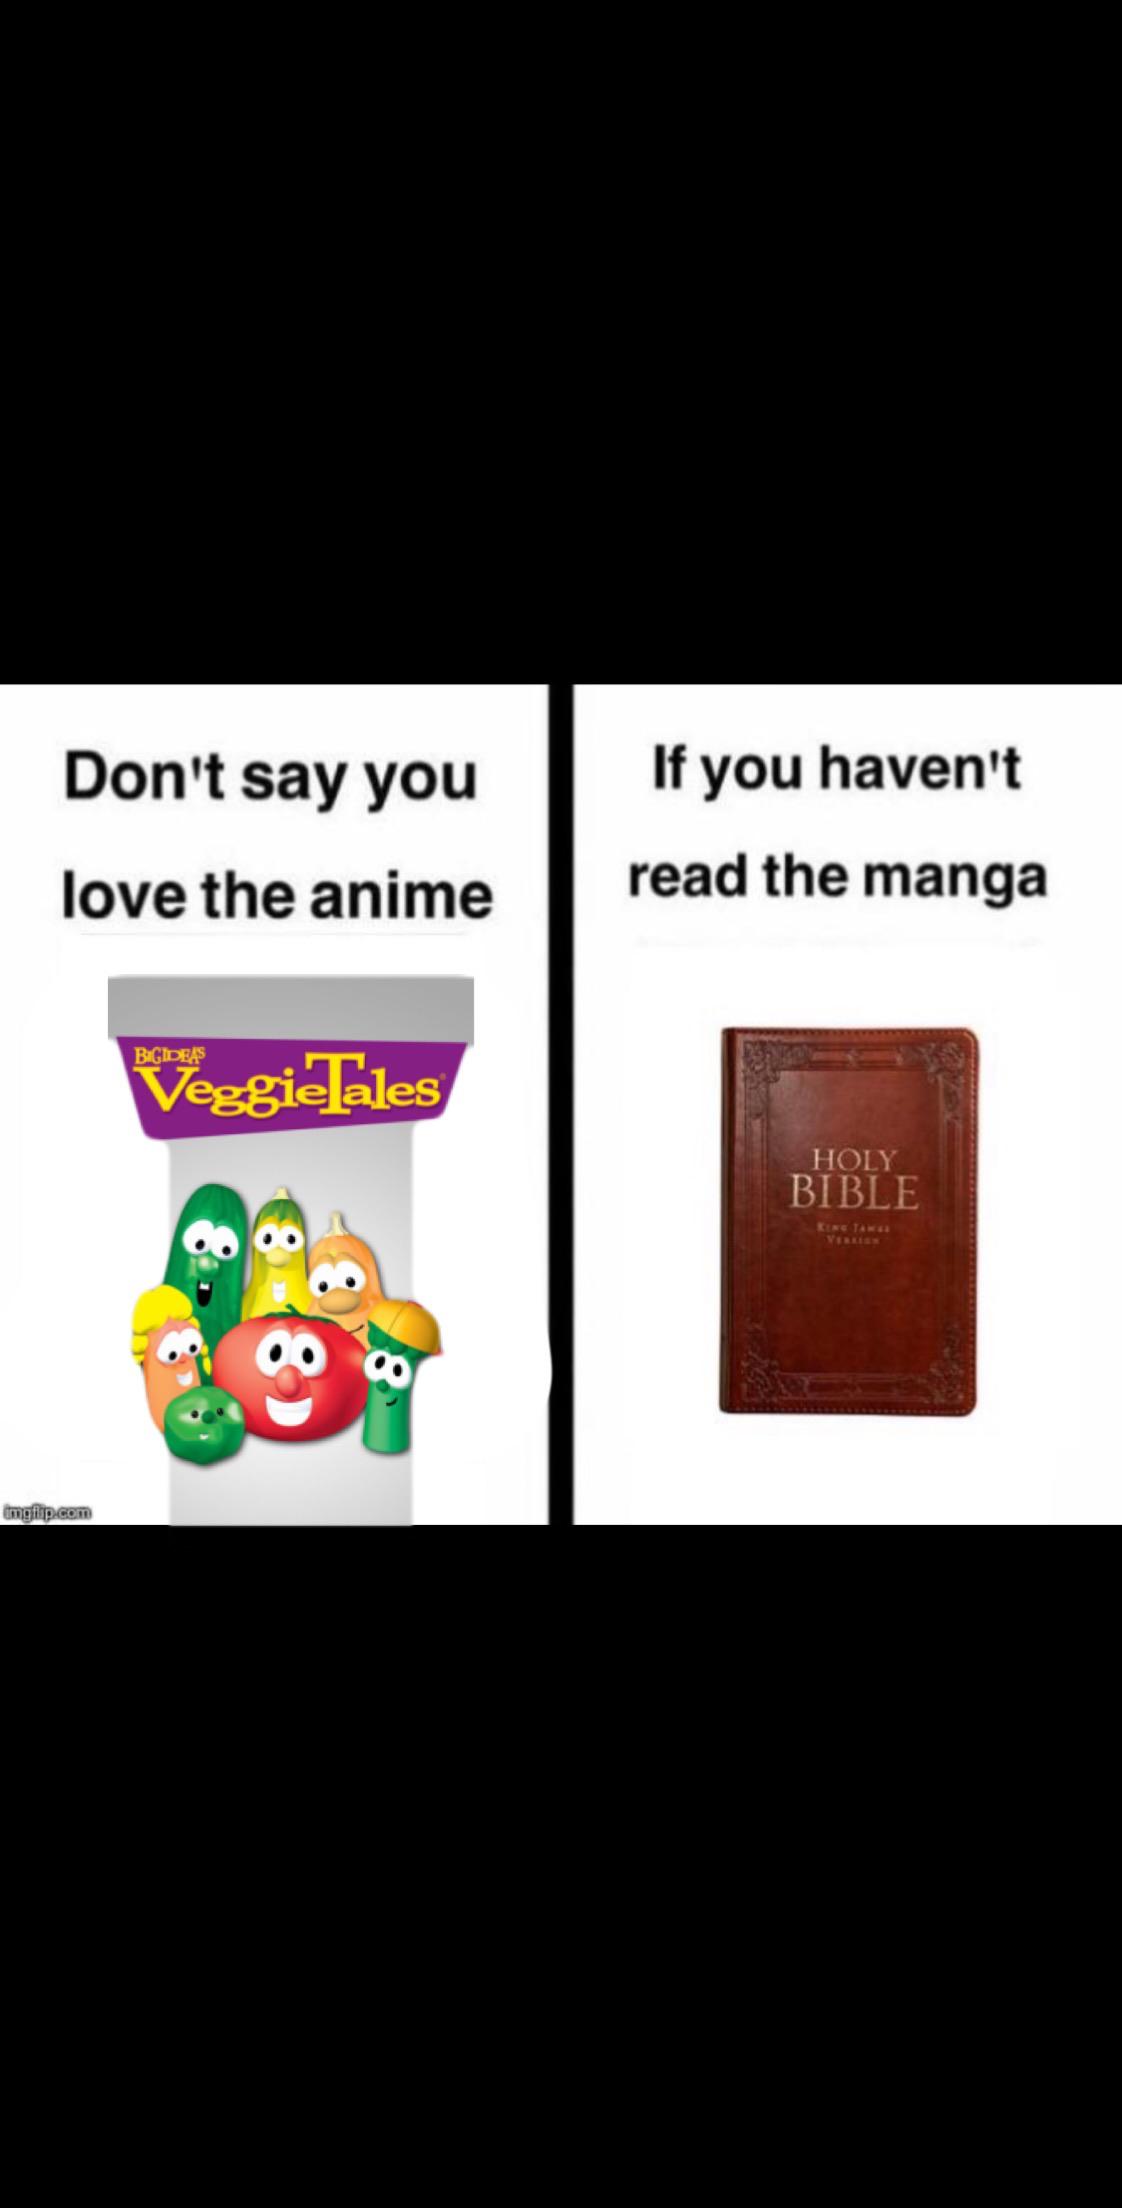 christian christian-memes christian text: Don't say you love the anime veggæleS If you haven't read the manga •i HOLY BIBLE 